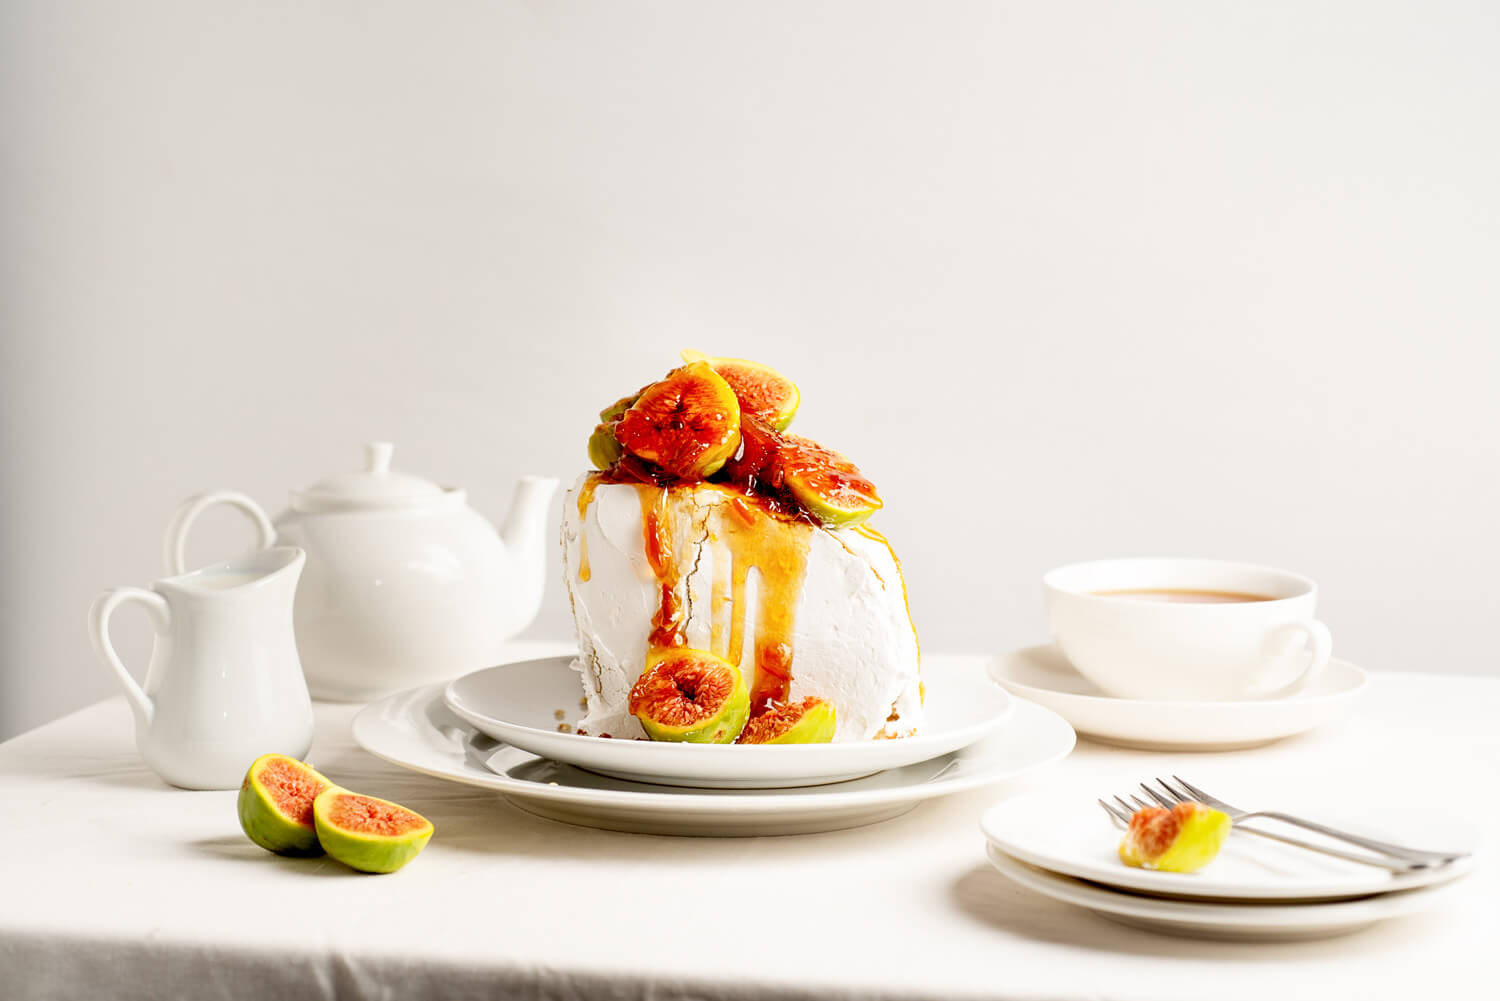 A pavlova cake with crisp white meringue is topped with fresh fig slices and a drizzling of honey, presented on a white plate. The table setting includes a teapot, milk jug, teacup, and extra plates, all in clean white, with a neutral background accentuating the dessert’s vibrant colors and textures.